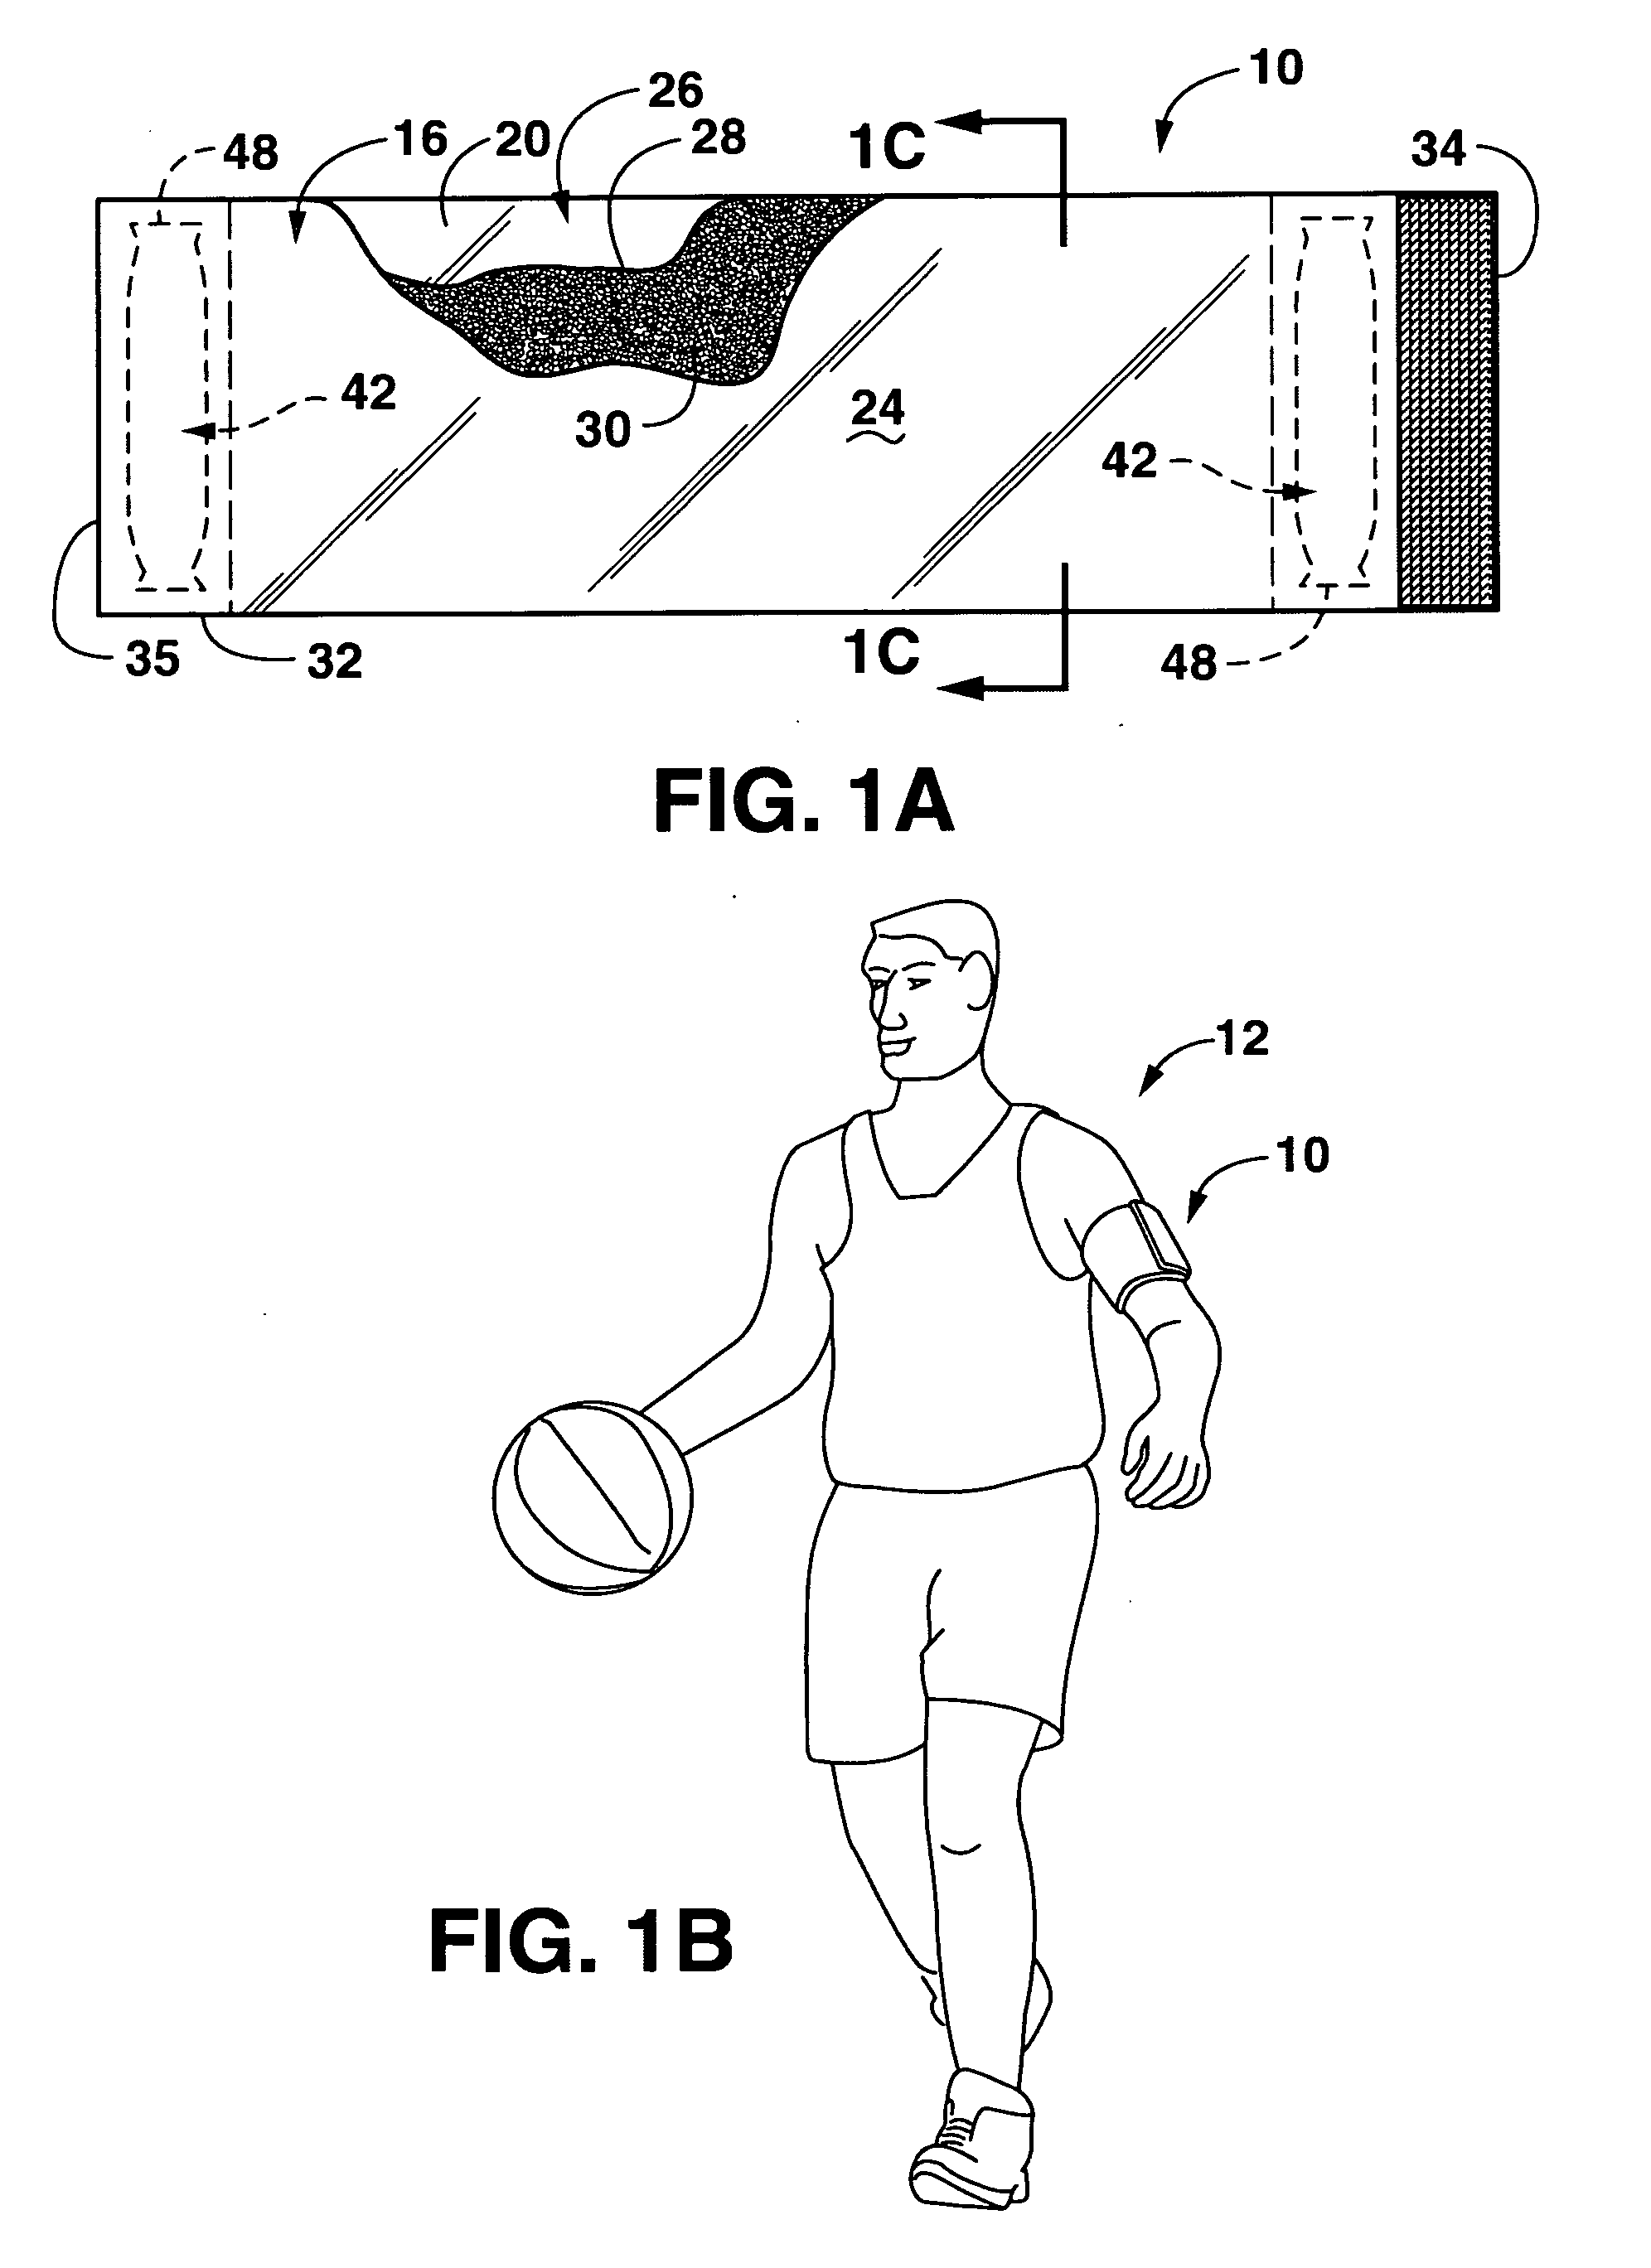 Self-activated warming device